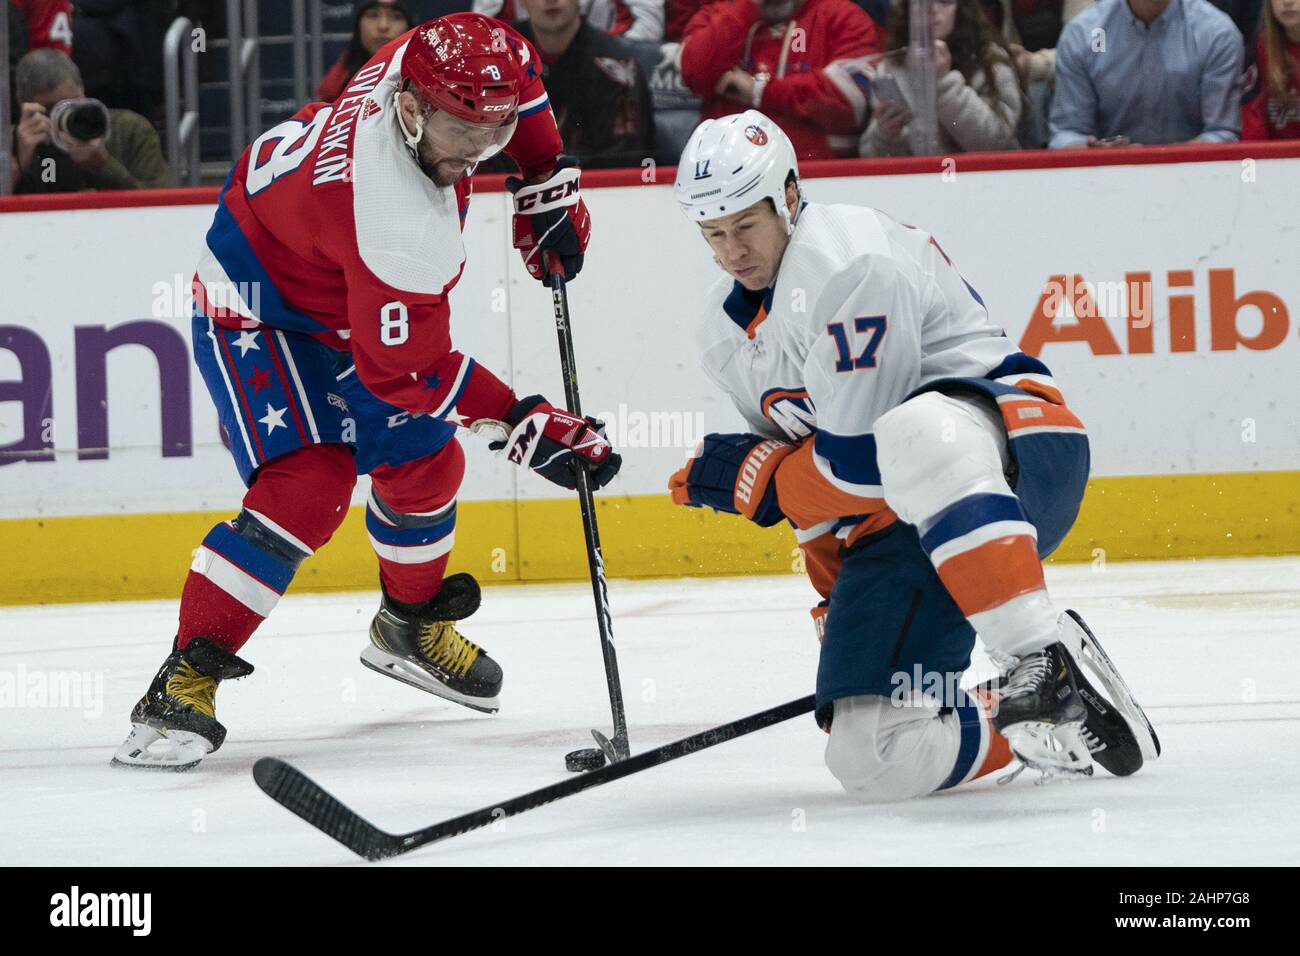 Washington Capitals left wing Alex Ovechkin (8) fakes a shot as New York Islanders left wing Matt Martin (17) looks to block during the second period at Capital One Arena in Washington, D.C. on Tuesday, December 31, 2019. The Washington Capitals finish the decade as the winningest team in the NHL with 465 wins since 2010. Photo by Alex Edelman/UPI Stock Photo